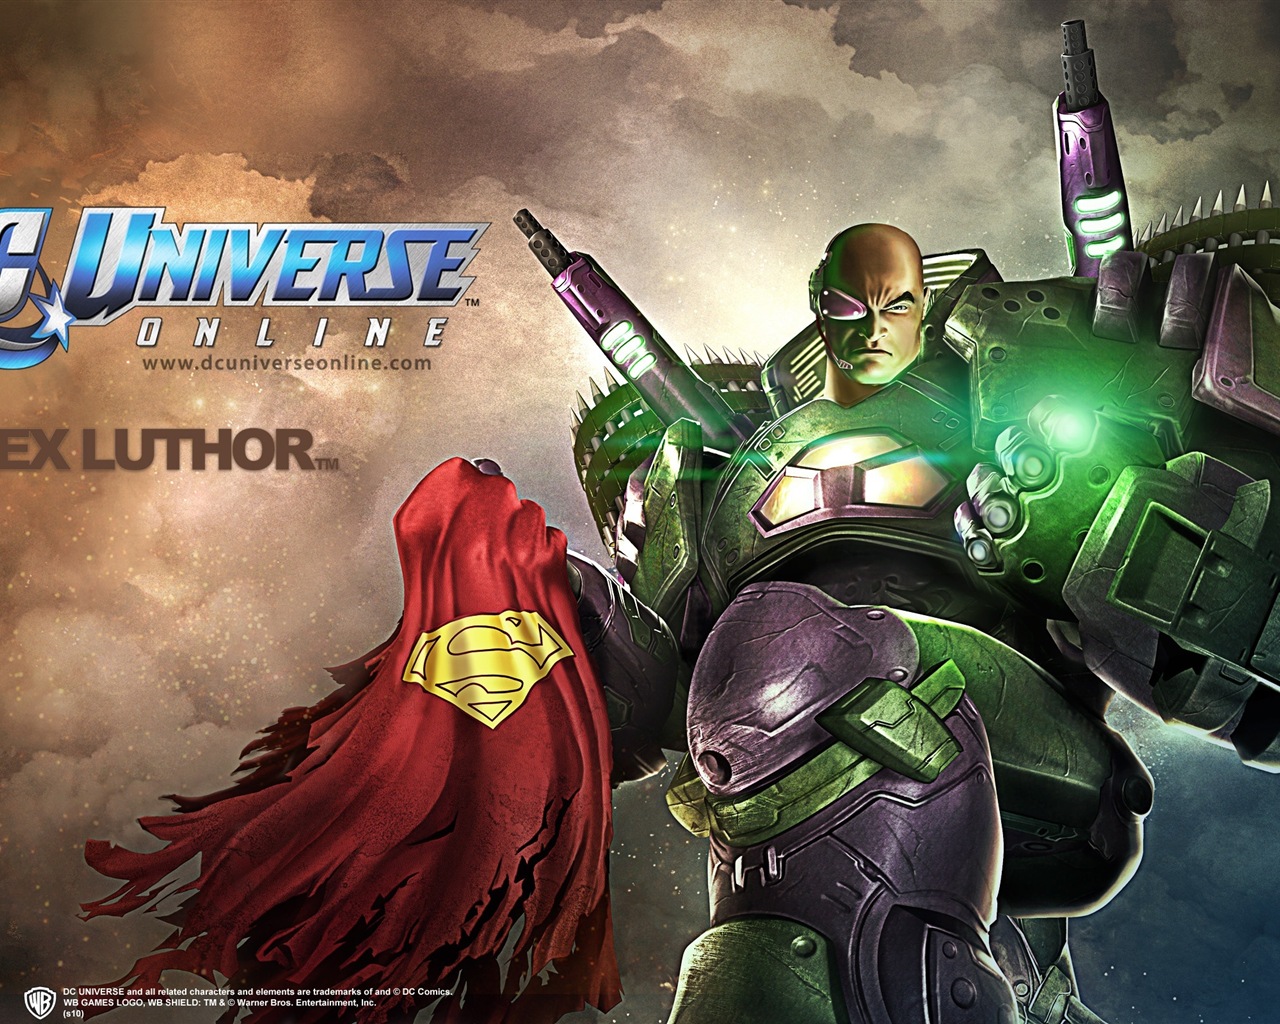 DC Universe Online HD game wallpapers #19 - 1280x1024